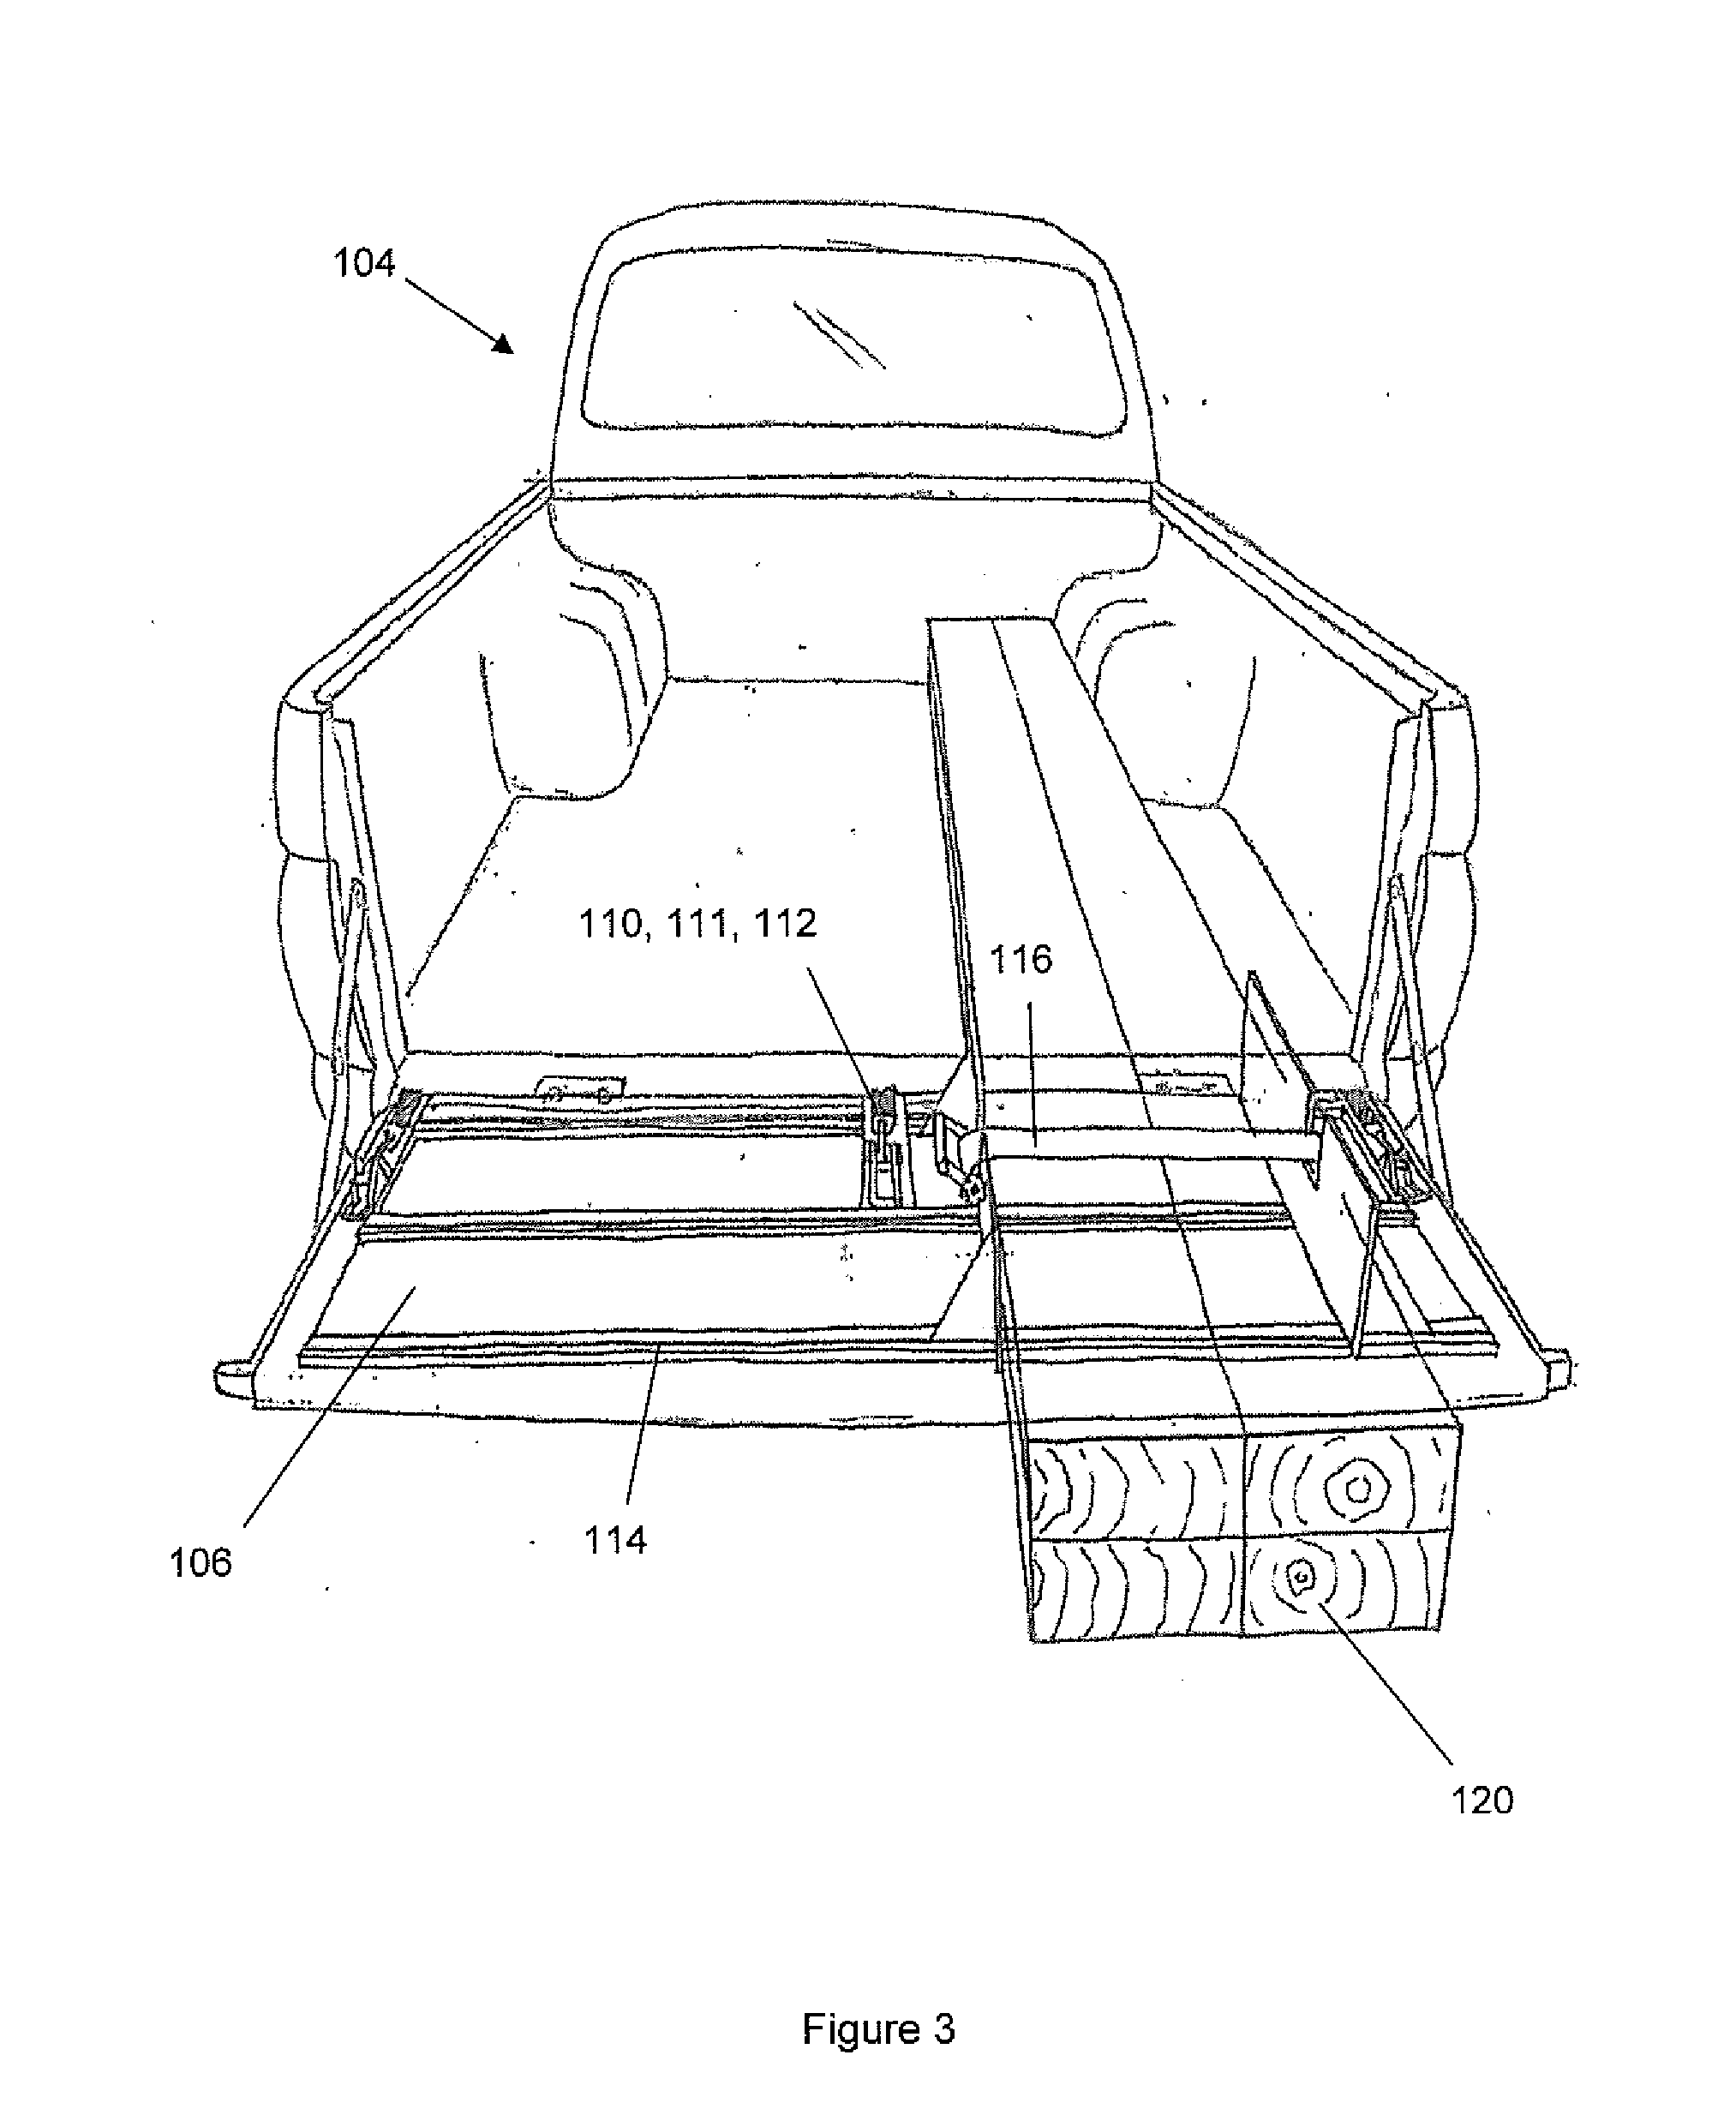 Mounting Device for Mounting an Object to a Vehicle